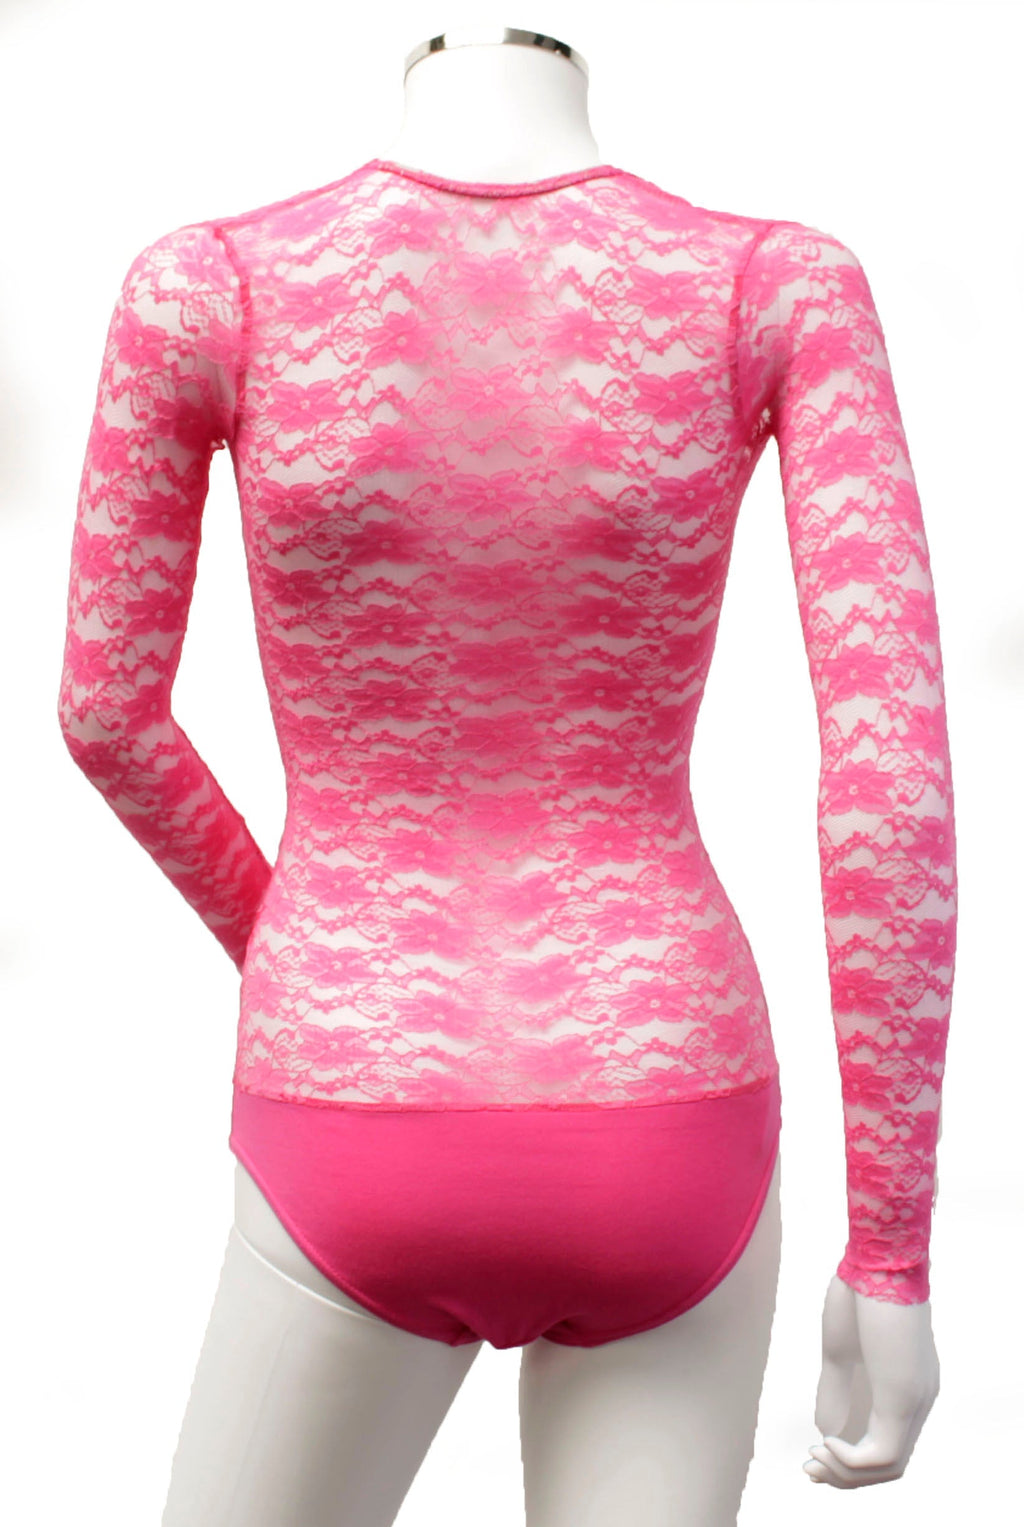 Seconds - Underbust with Sleeves - Pink Lace